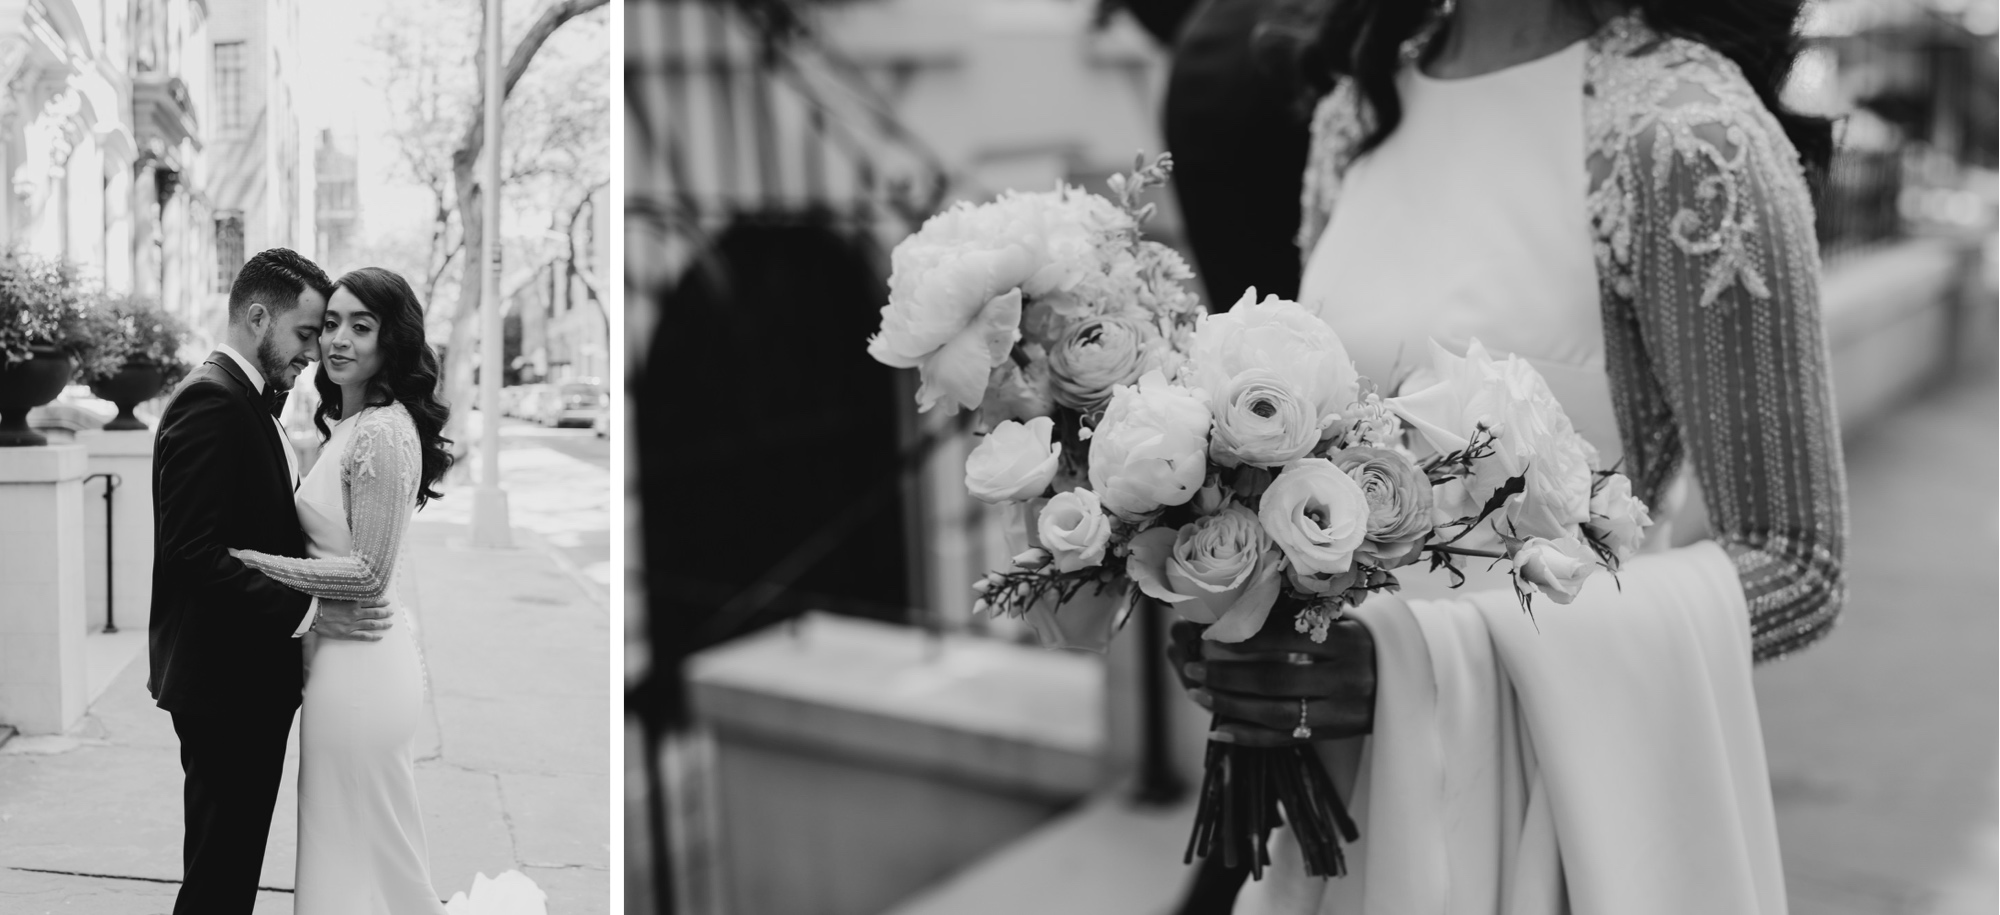 a portrait of a bride and groom on their wedding day and a photo of a bridal bouquet in brooklyn, new york city